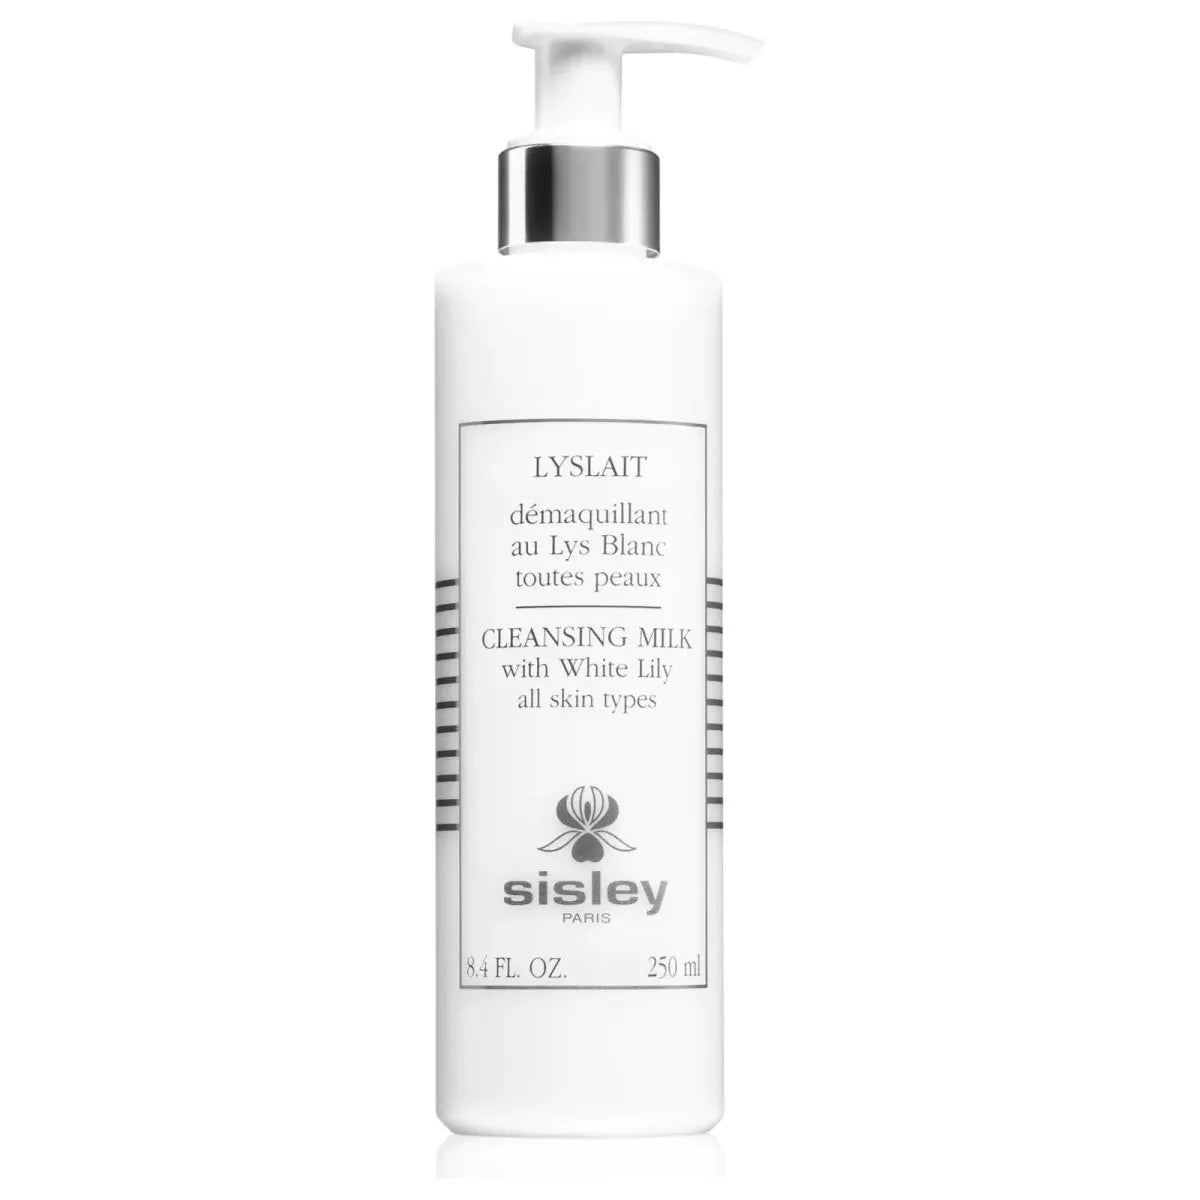 Sisley Cleansing Milk with White Lily for All Skin Types 250ml - Glam Global UK